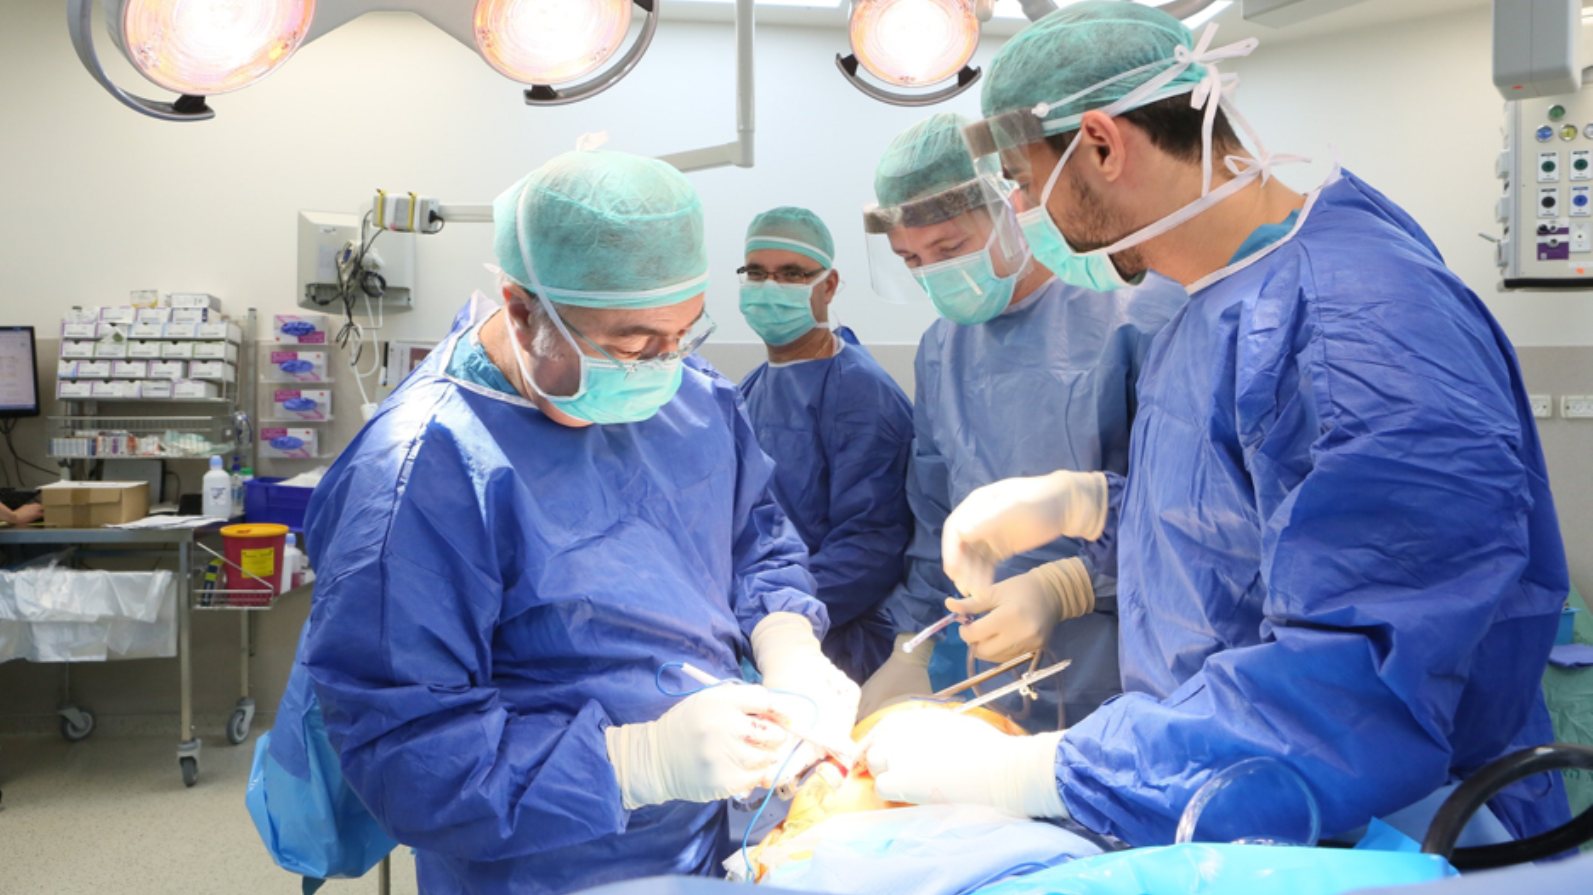 Dr. Daniel Levin doing a hip replacement using MP-1 at Rambam Health Care Campus, Haifa. Photo by Piotr Felter